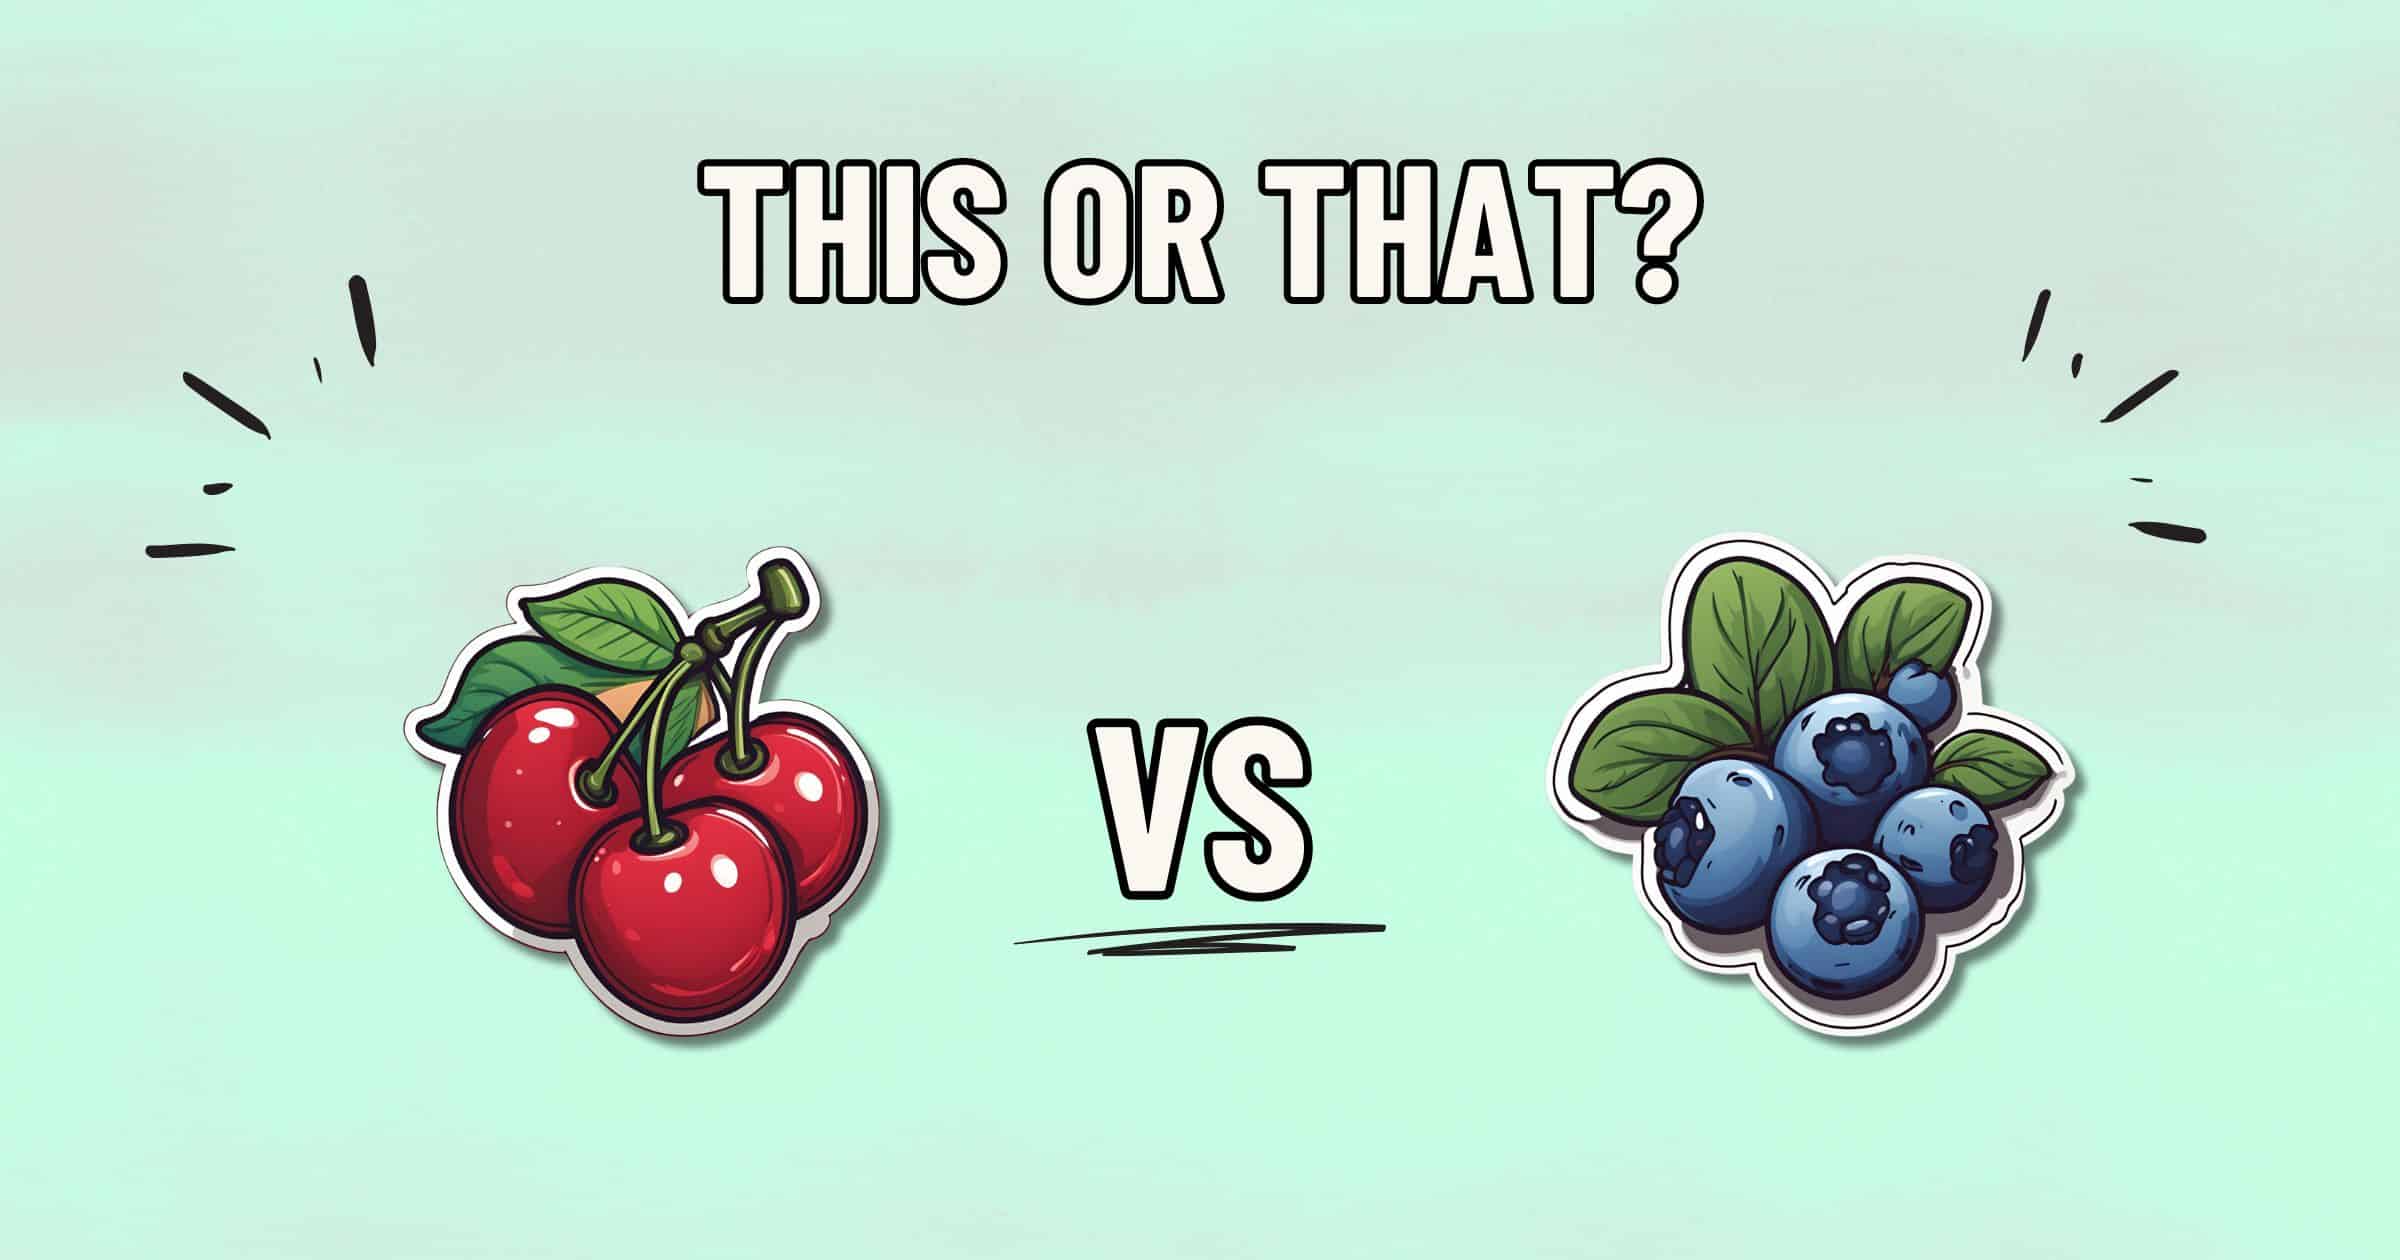 An illustration with the text "This or That?" at the top. Below, there are two images: a bunch of cherries on the left and a cluster of blueberries on the right, separated by a "VS" in the middle. The background is a soft green color, suggesting which fruit might be healthier for you.